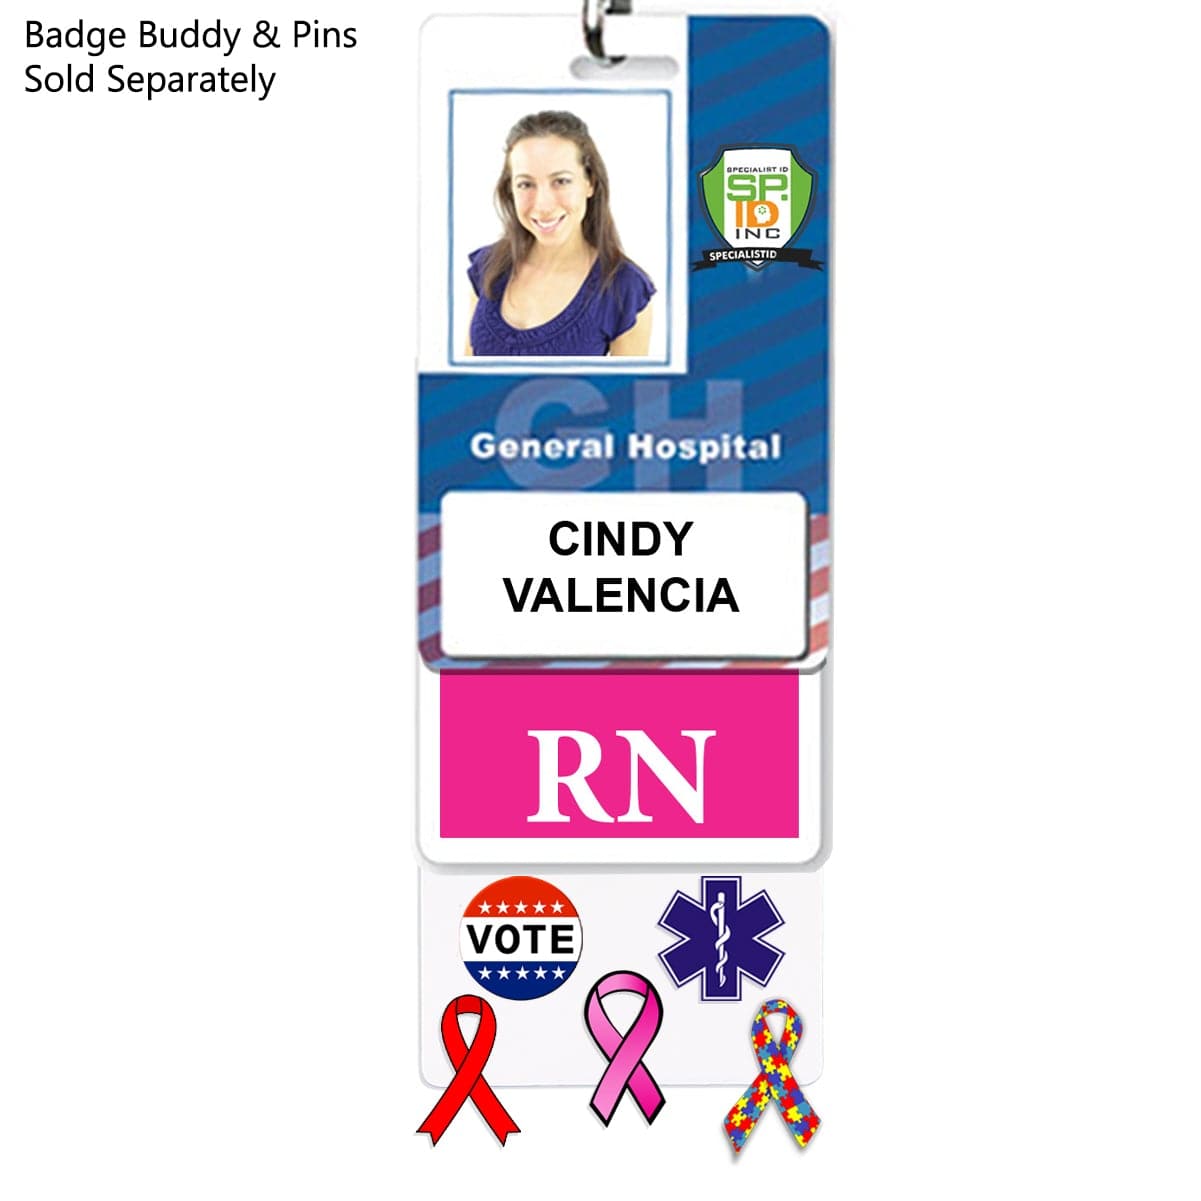 Pin Buddy Badge for Displaying Pins with Badge Bud